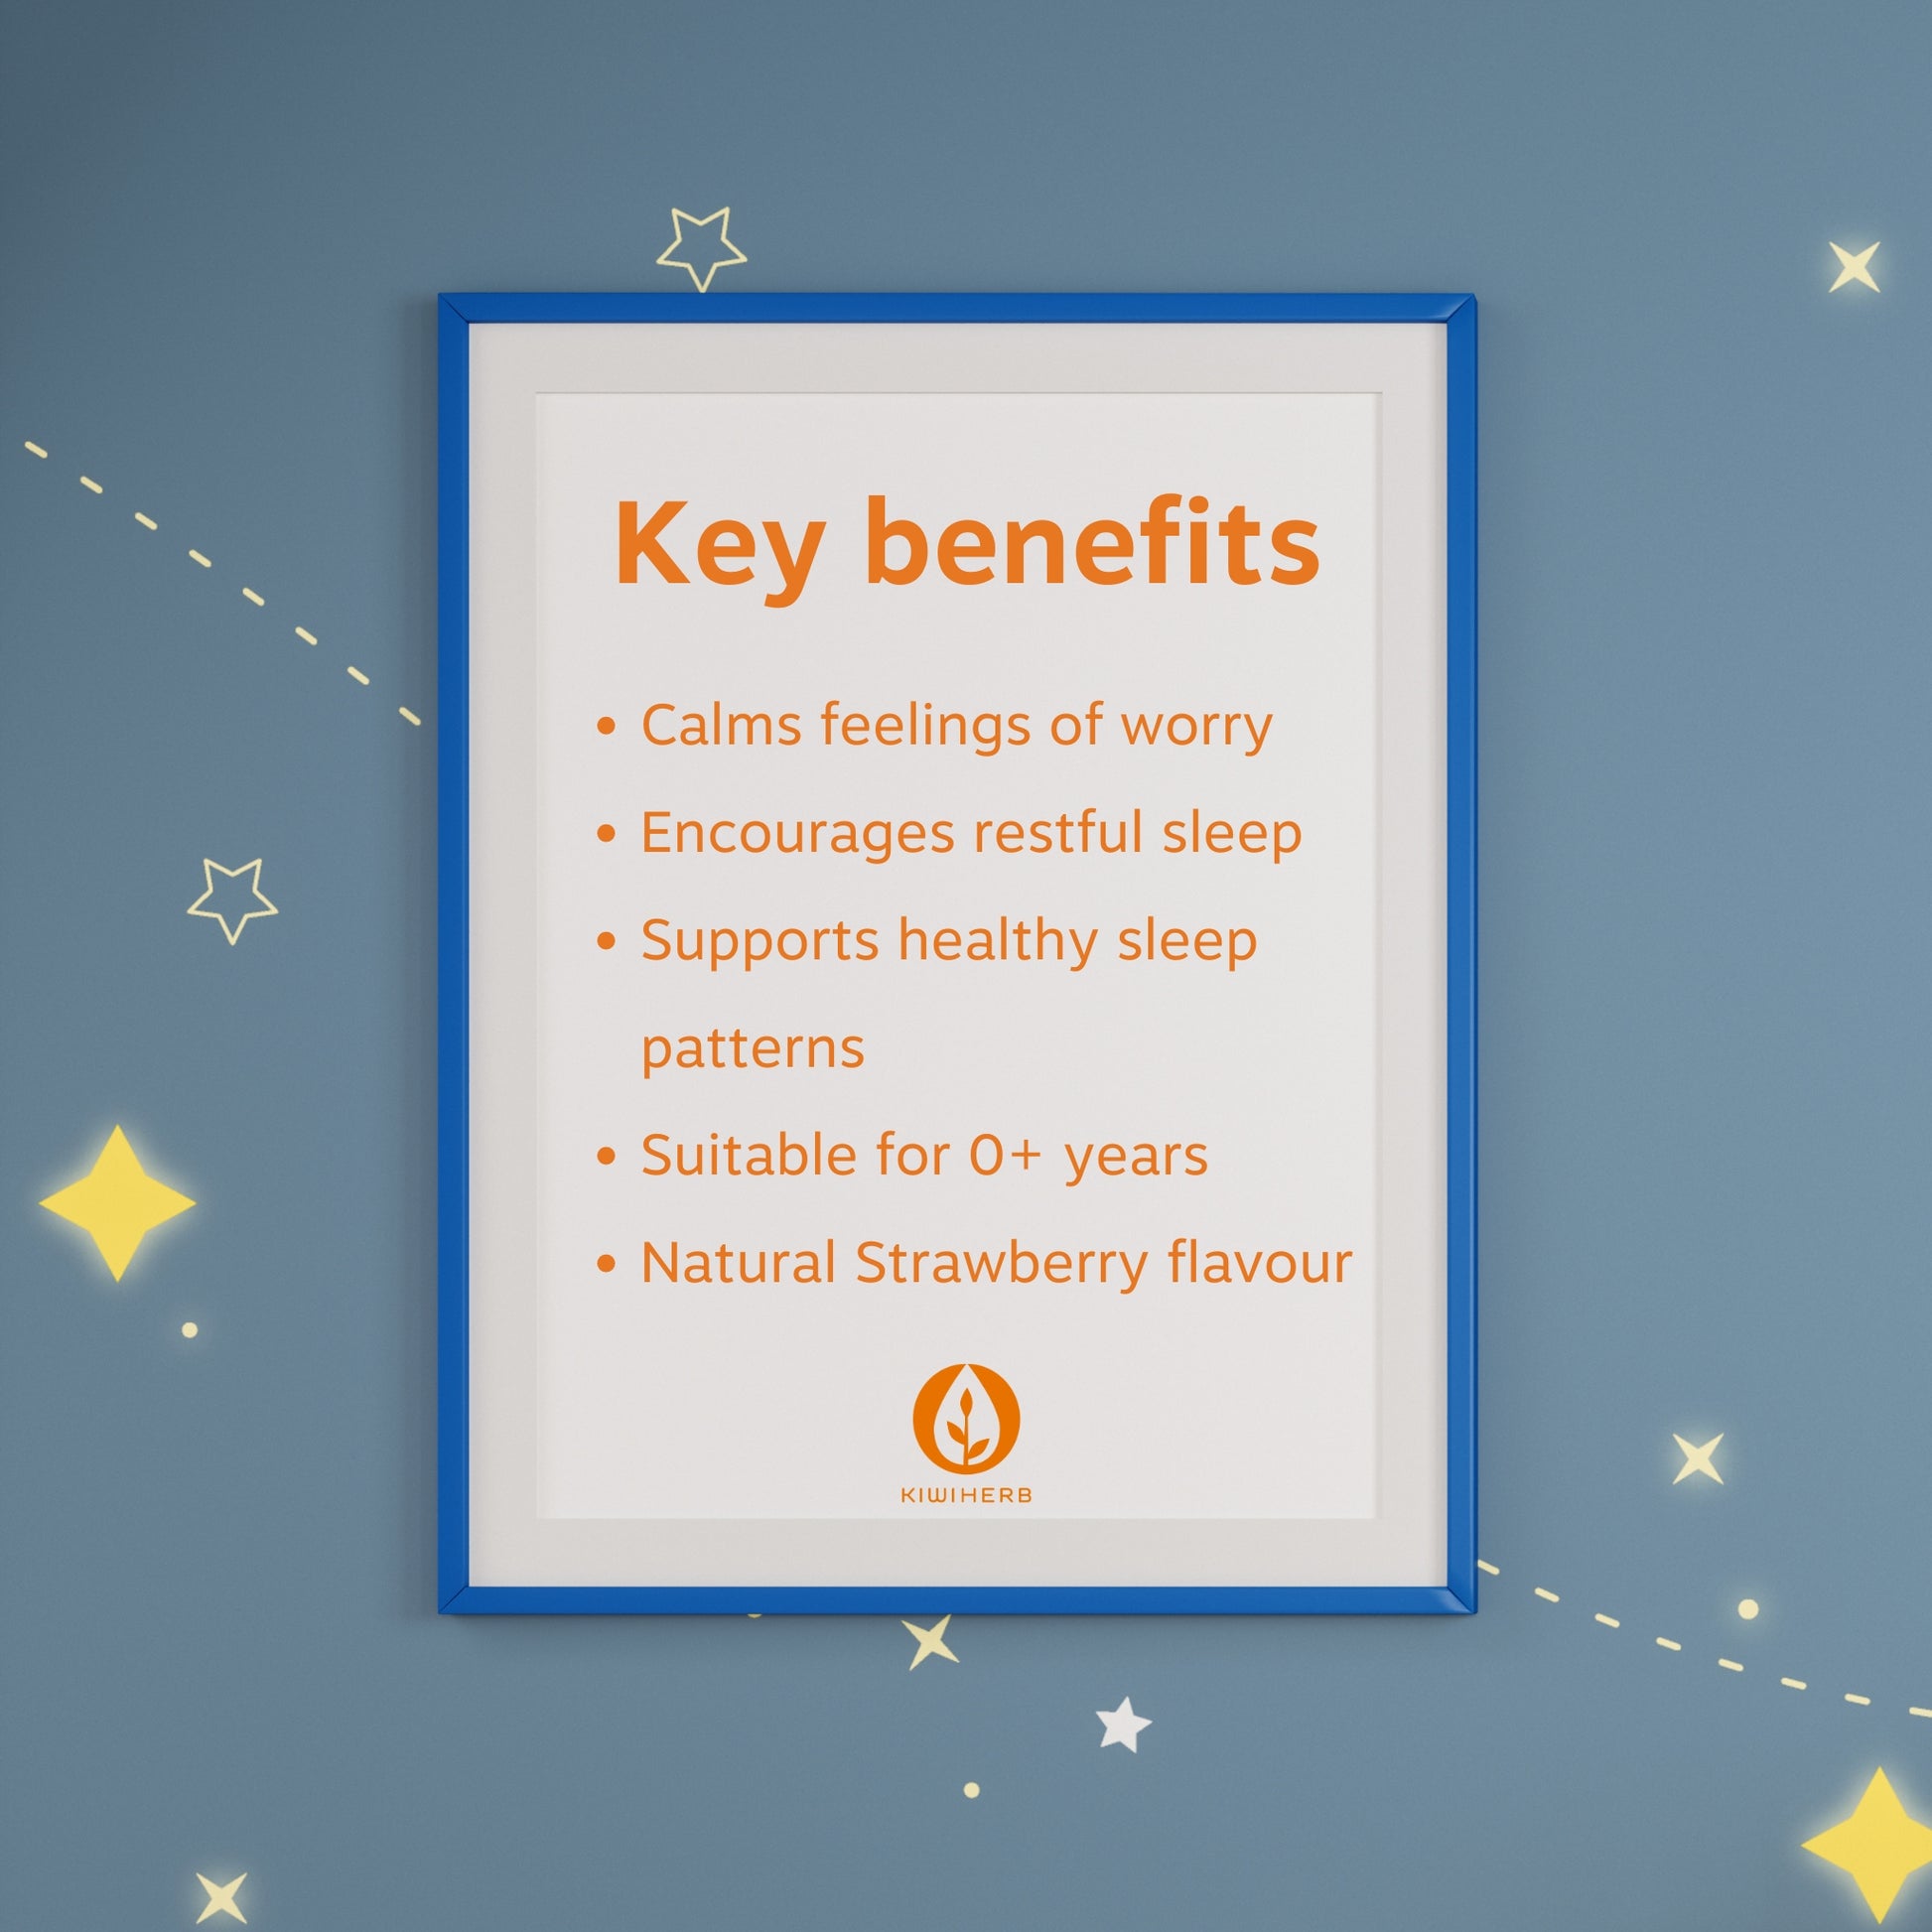 A list of key benefits of Bedtime Bliss on a night sky background with yellow stars.